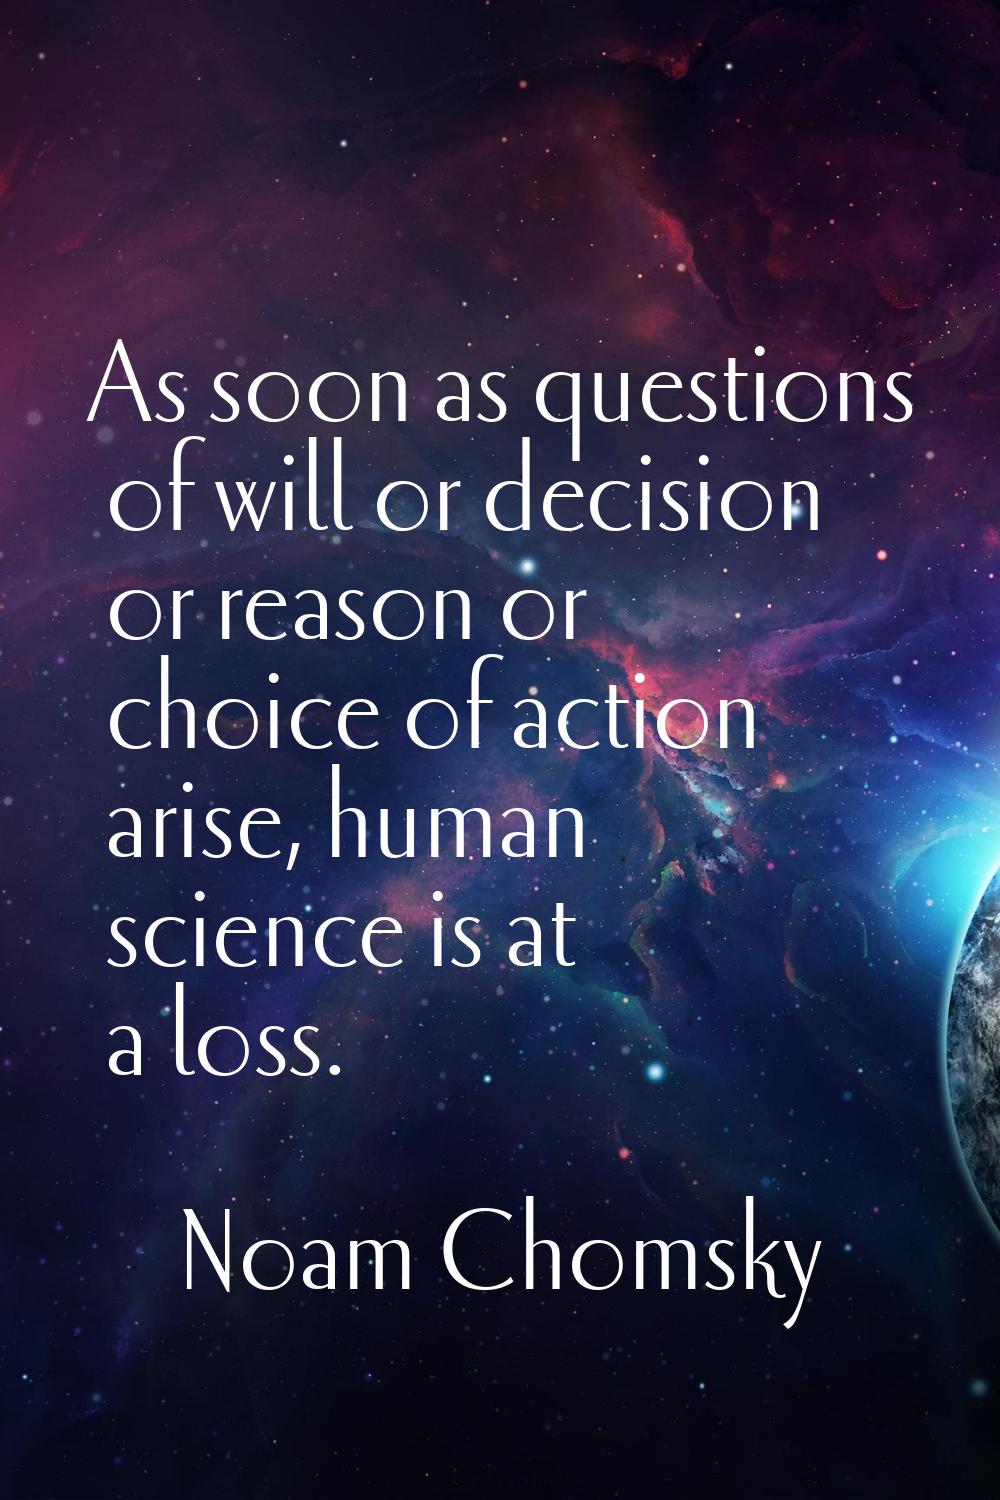 As soon as questions of will or decision or reason or choice of action arise, human science is at a